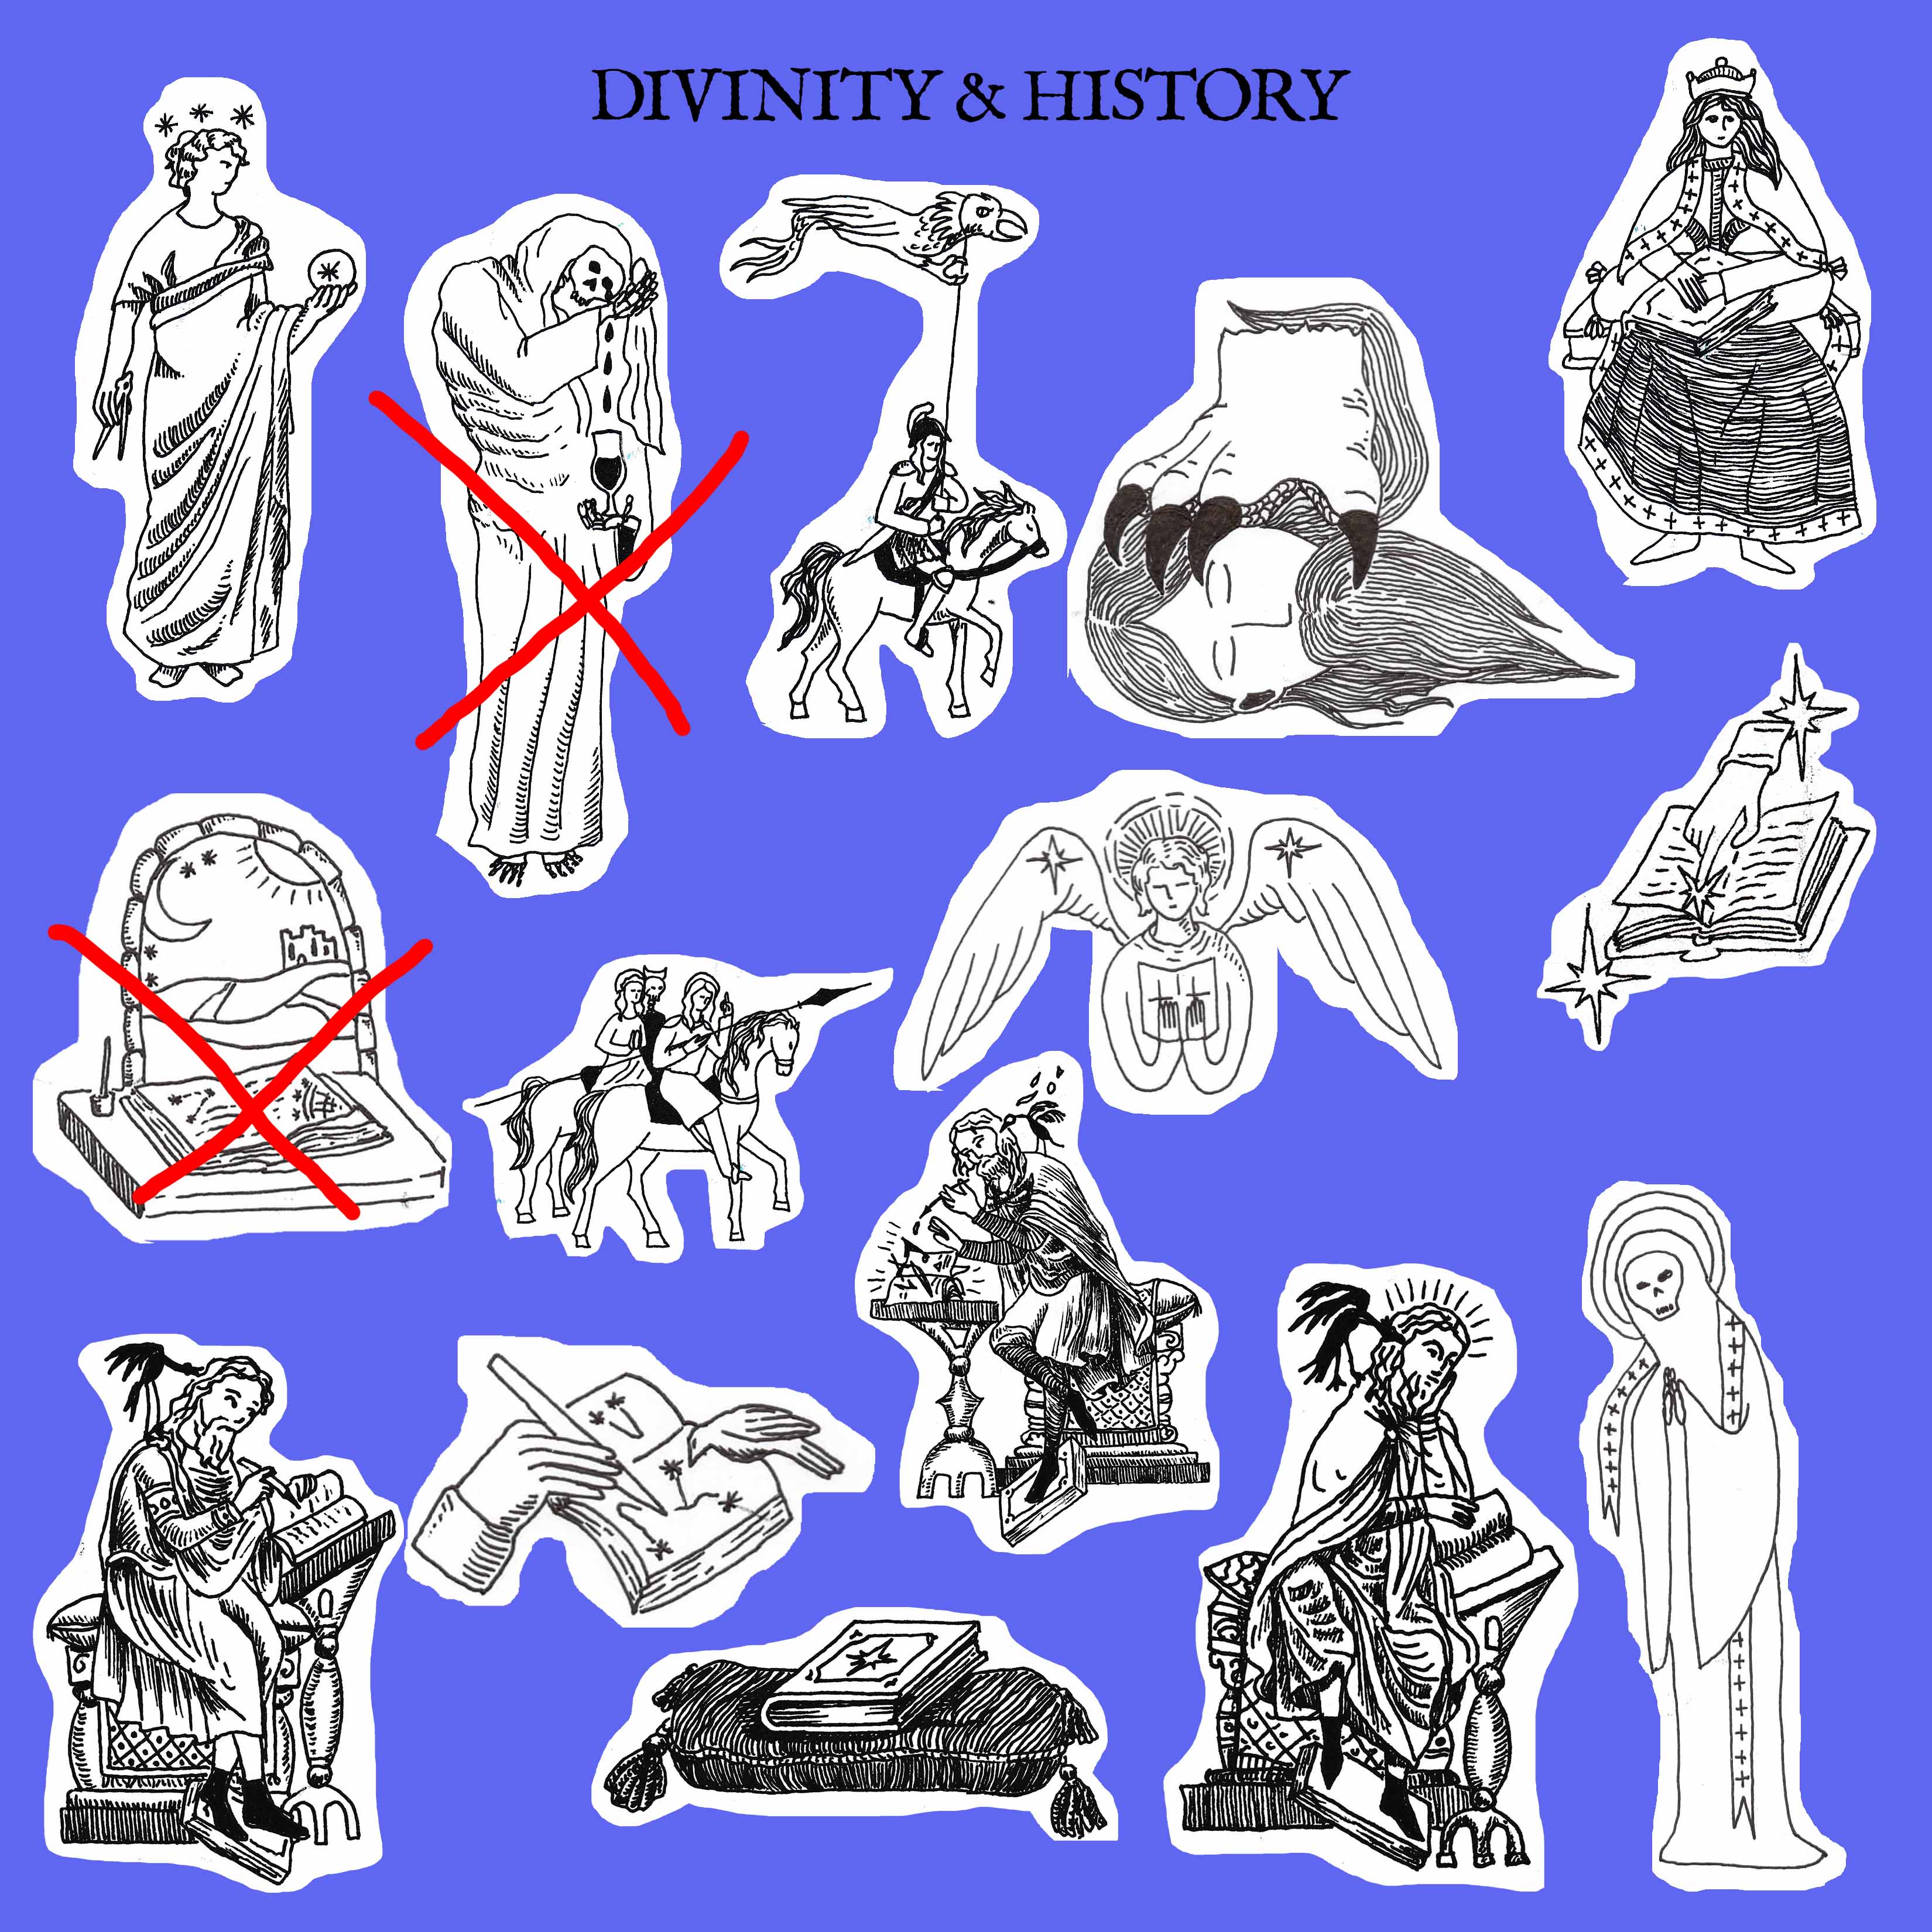 21-Urania (Muse of astronomy), 22-weeping death, 23-female warrior<br>
24-gotten by the beast, 25-Pope Joan (middle ages pope), 26- naturalist window<br>
27-Girl, woman, death on horse<br>
28-saintly angel, 29-divine book, 30-scrib, 31-charting in a book<br>
32-channeling into letters, 33-book on pillow, 34-the reader, 35-wraith 
